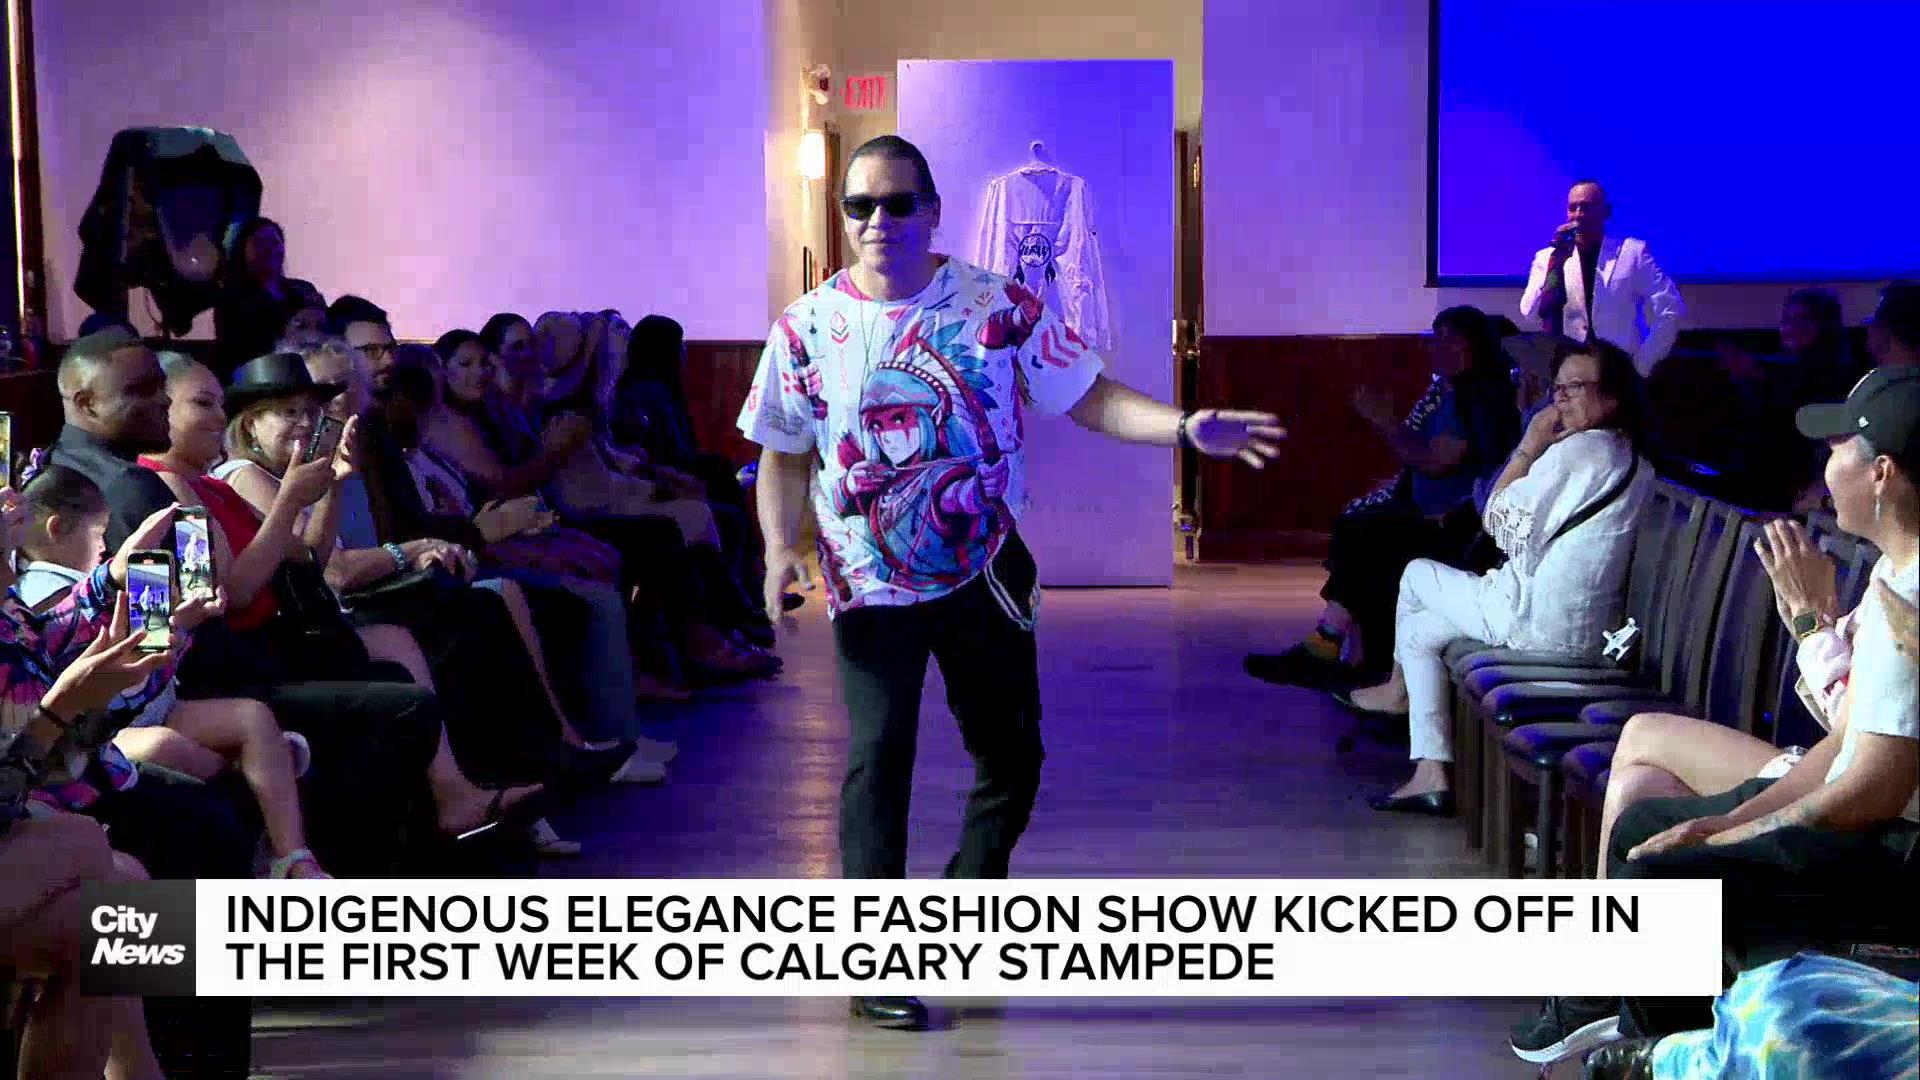 Indigenous Elegance Fashion Show kicked off in the first week of Calgary Stampede